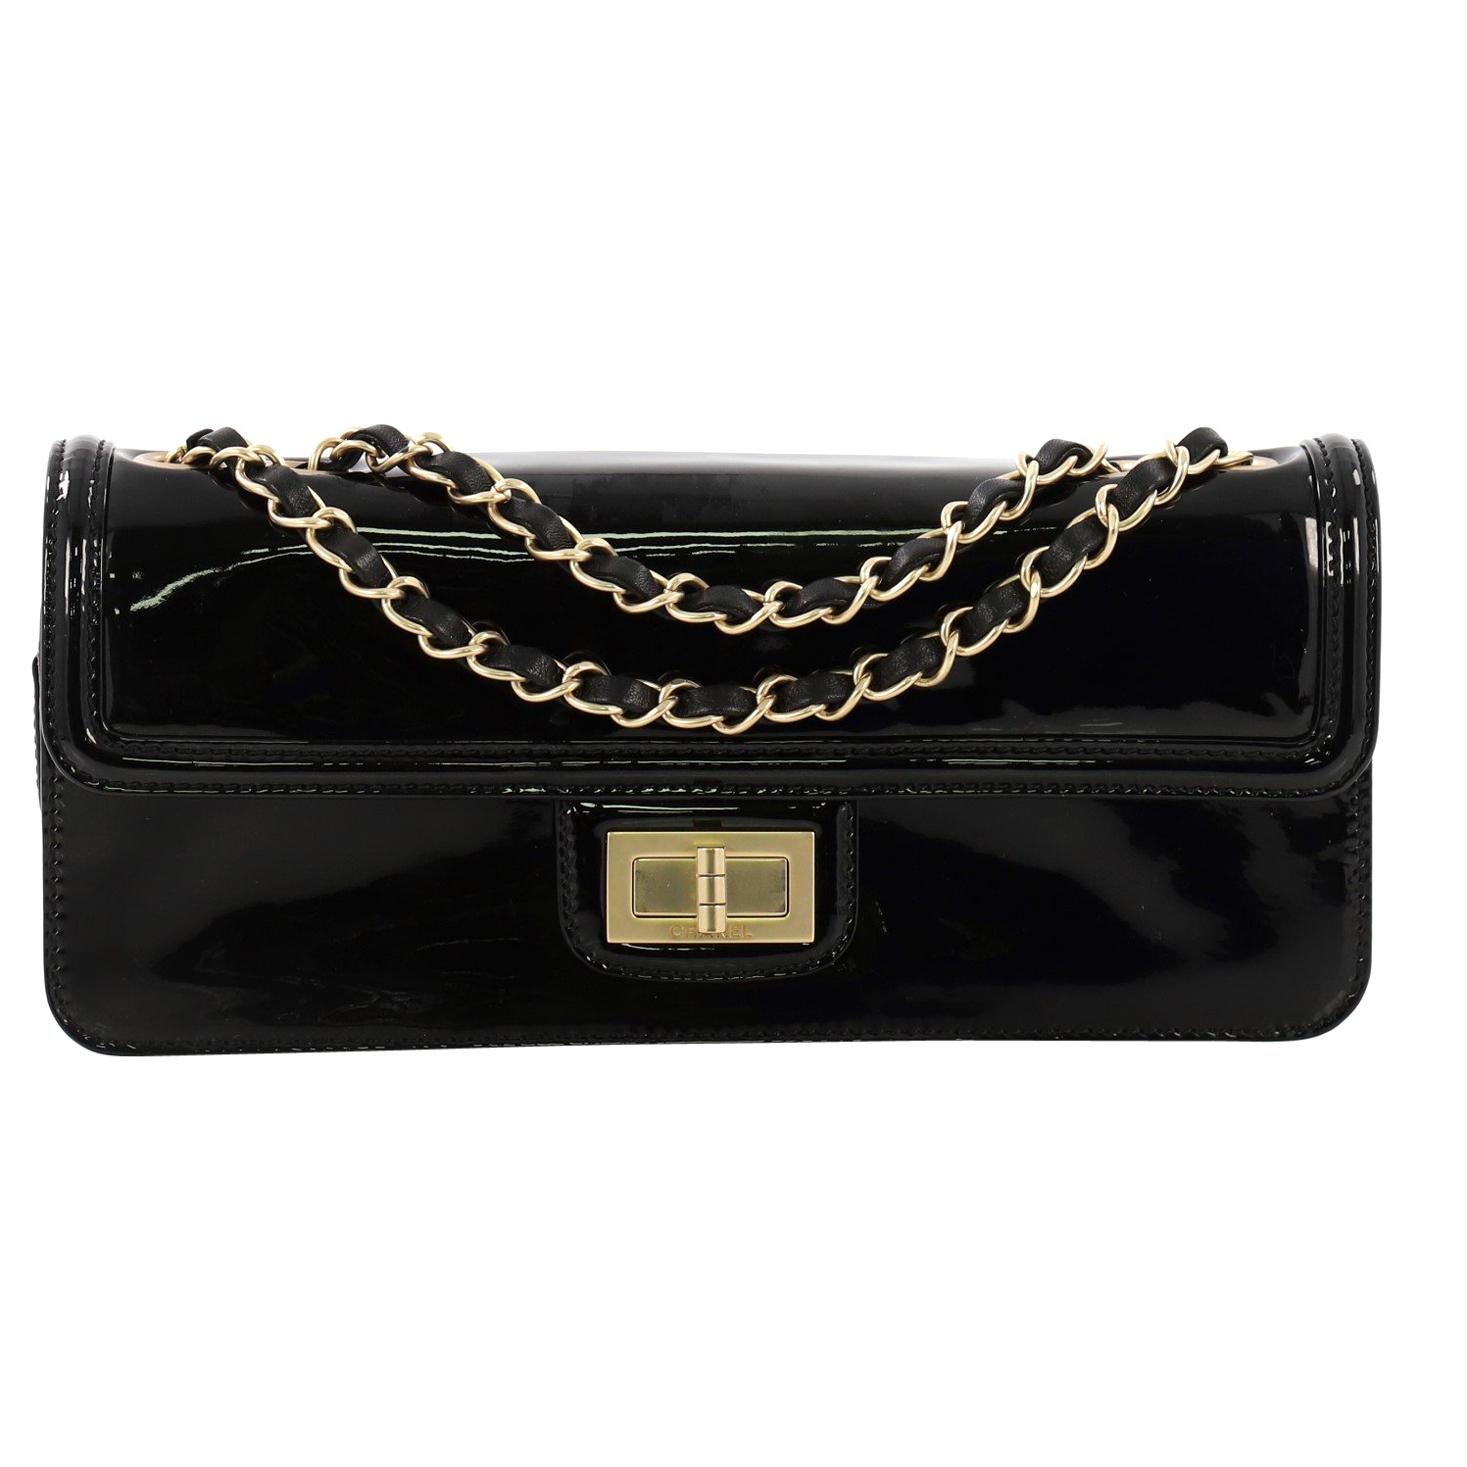 Chanel Mademoiselle Flap Bag Patent East West